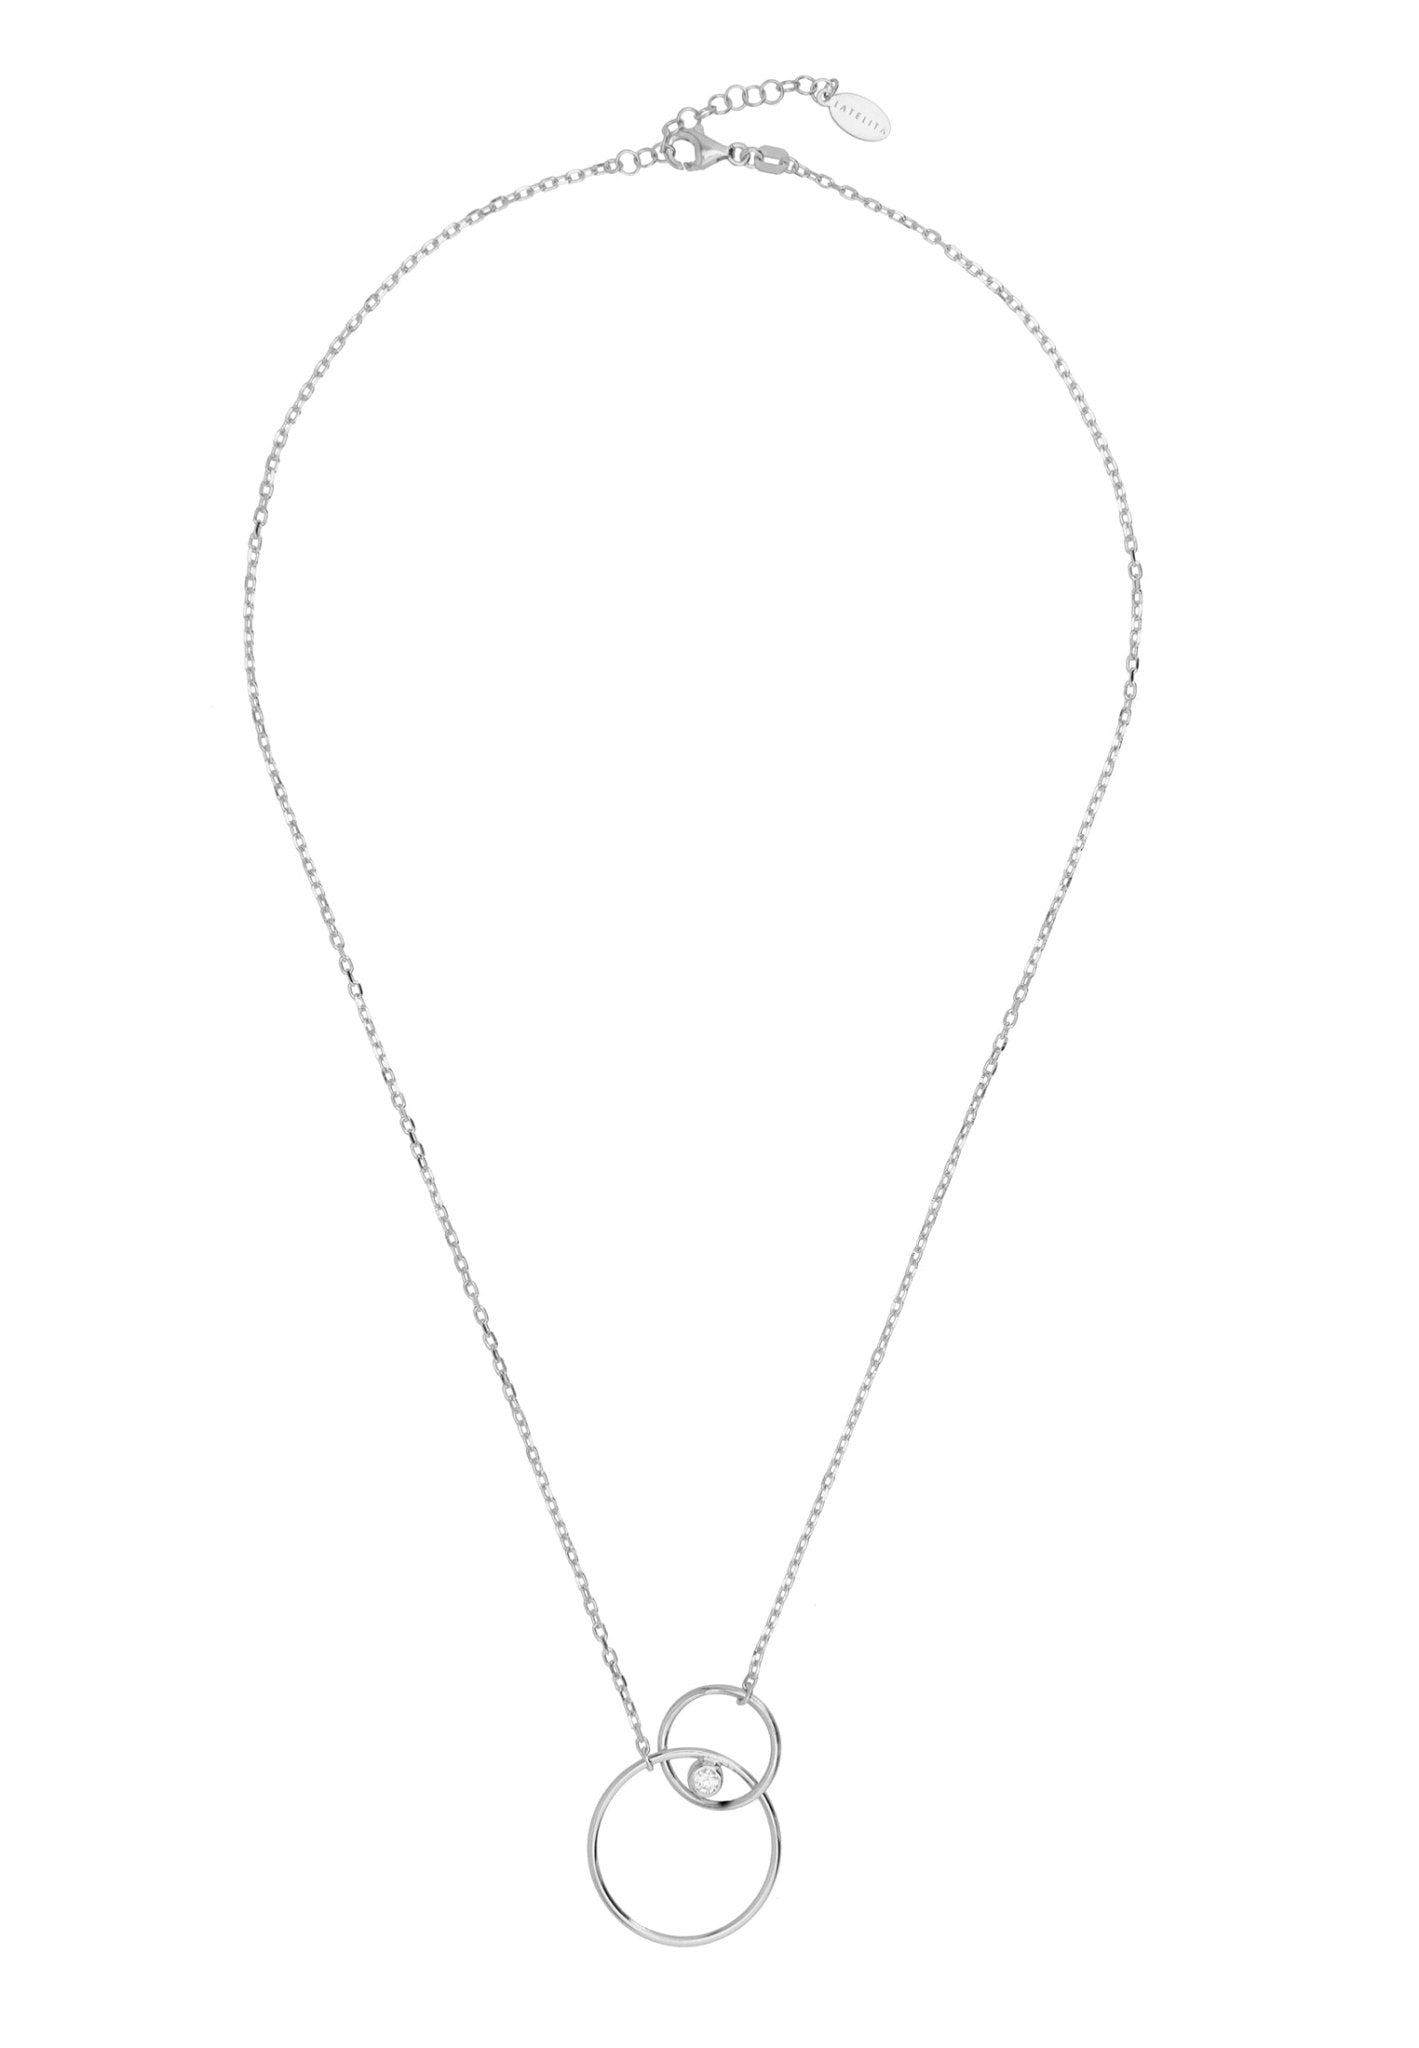 Linked Halo Circle Necklace Silver - LATELITA Necklaces